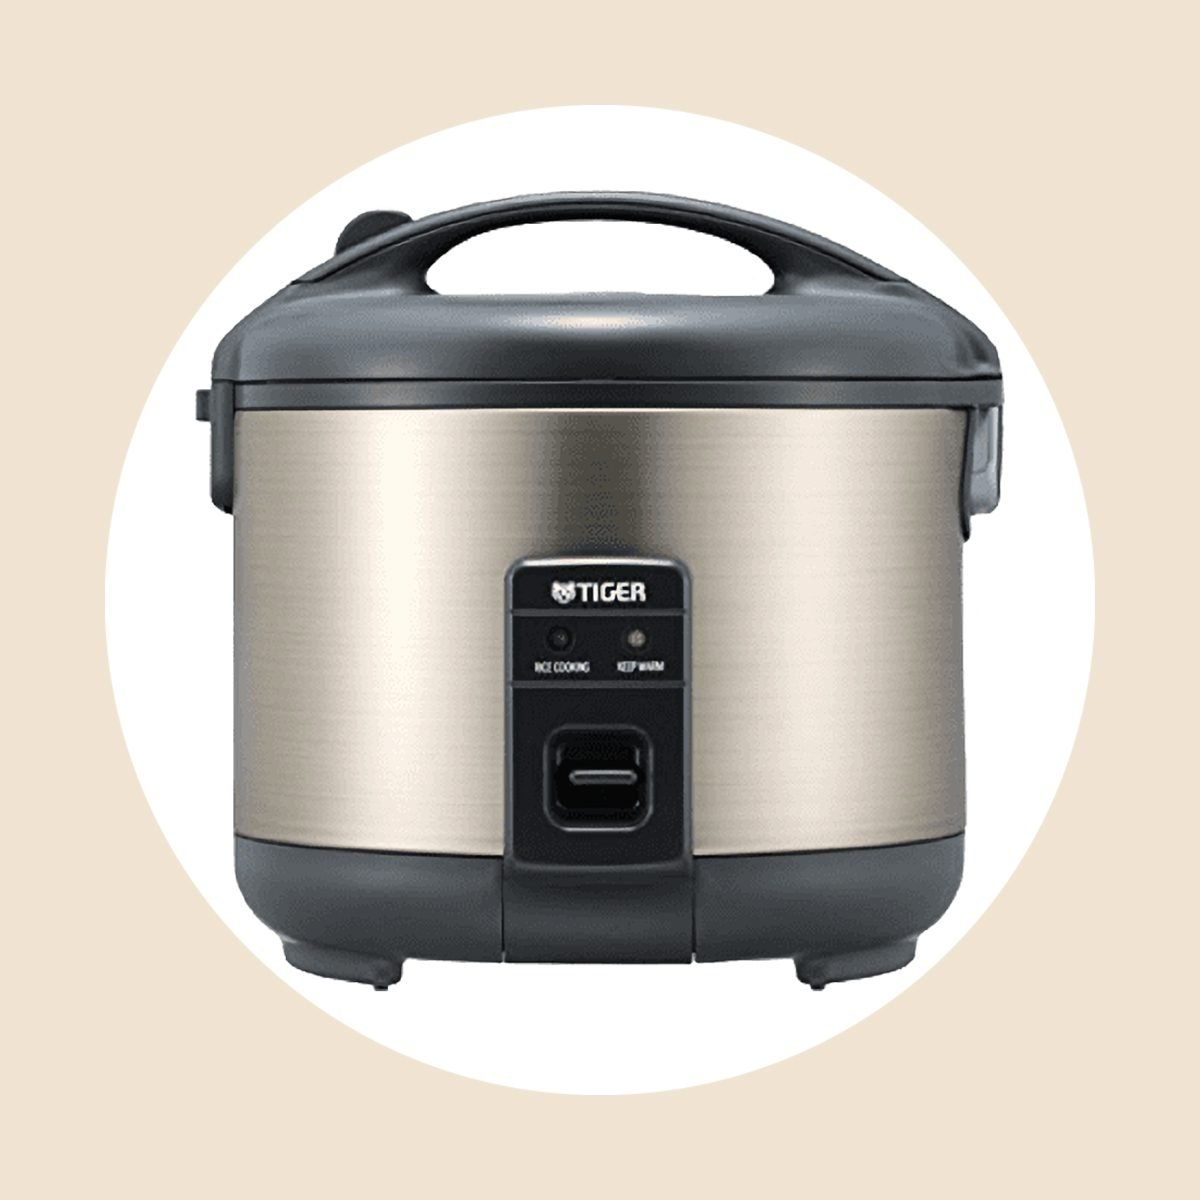 Black Decker 16 Cup Rice Cooker review - Best Rice Cookers 2021